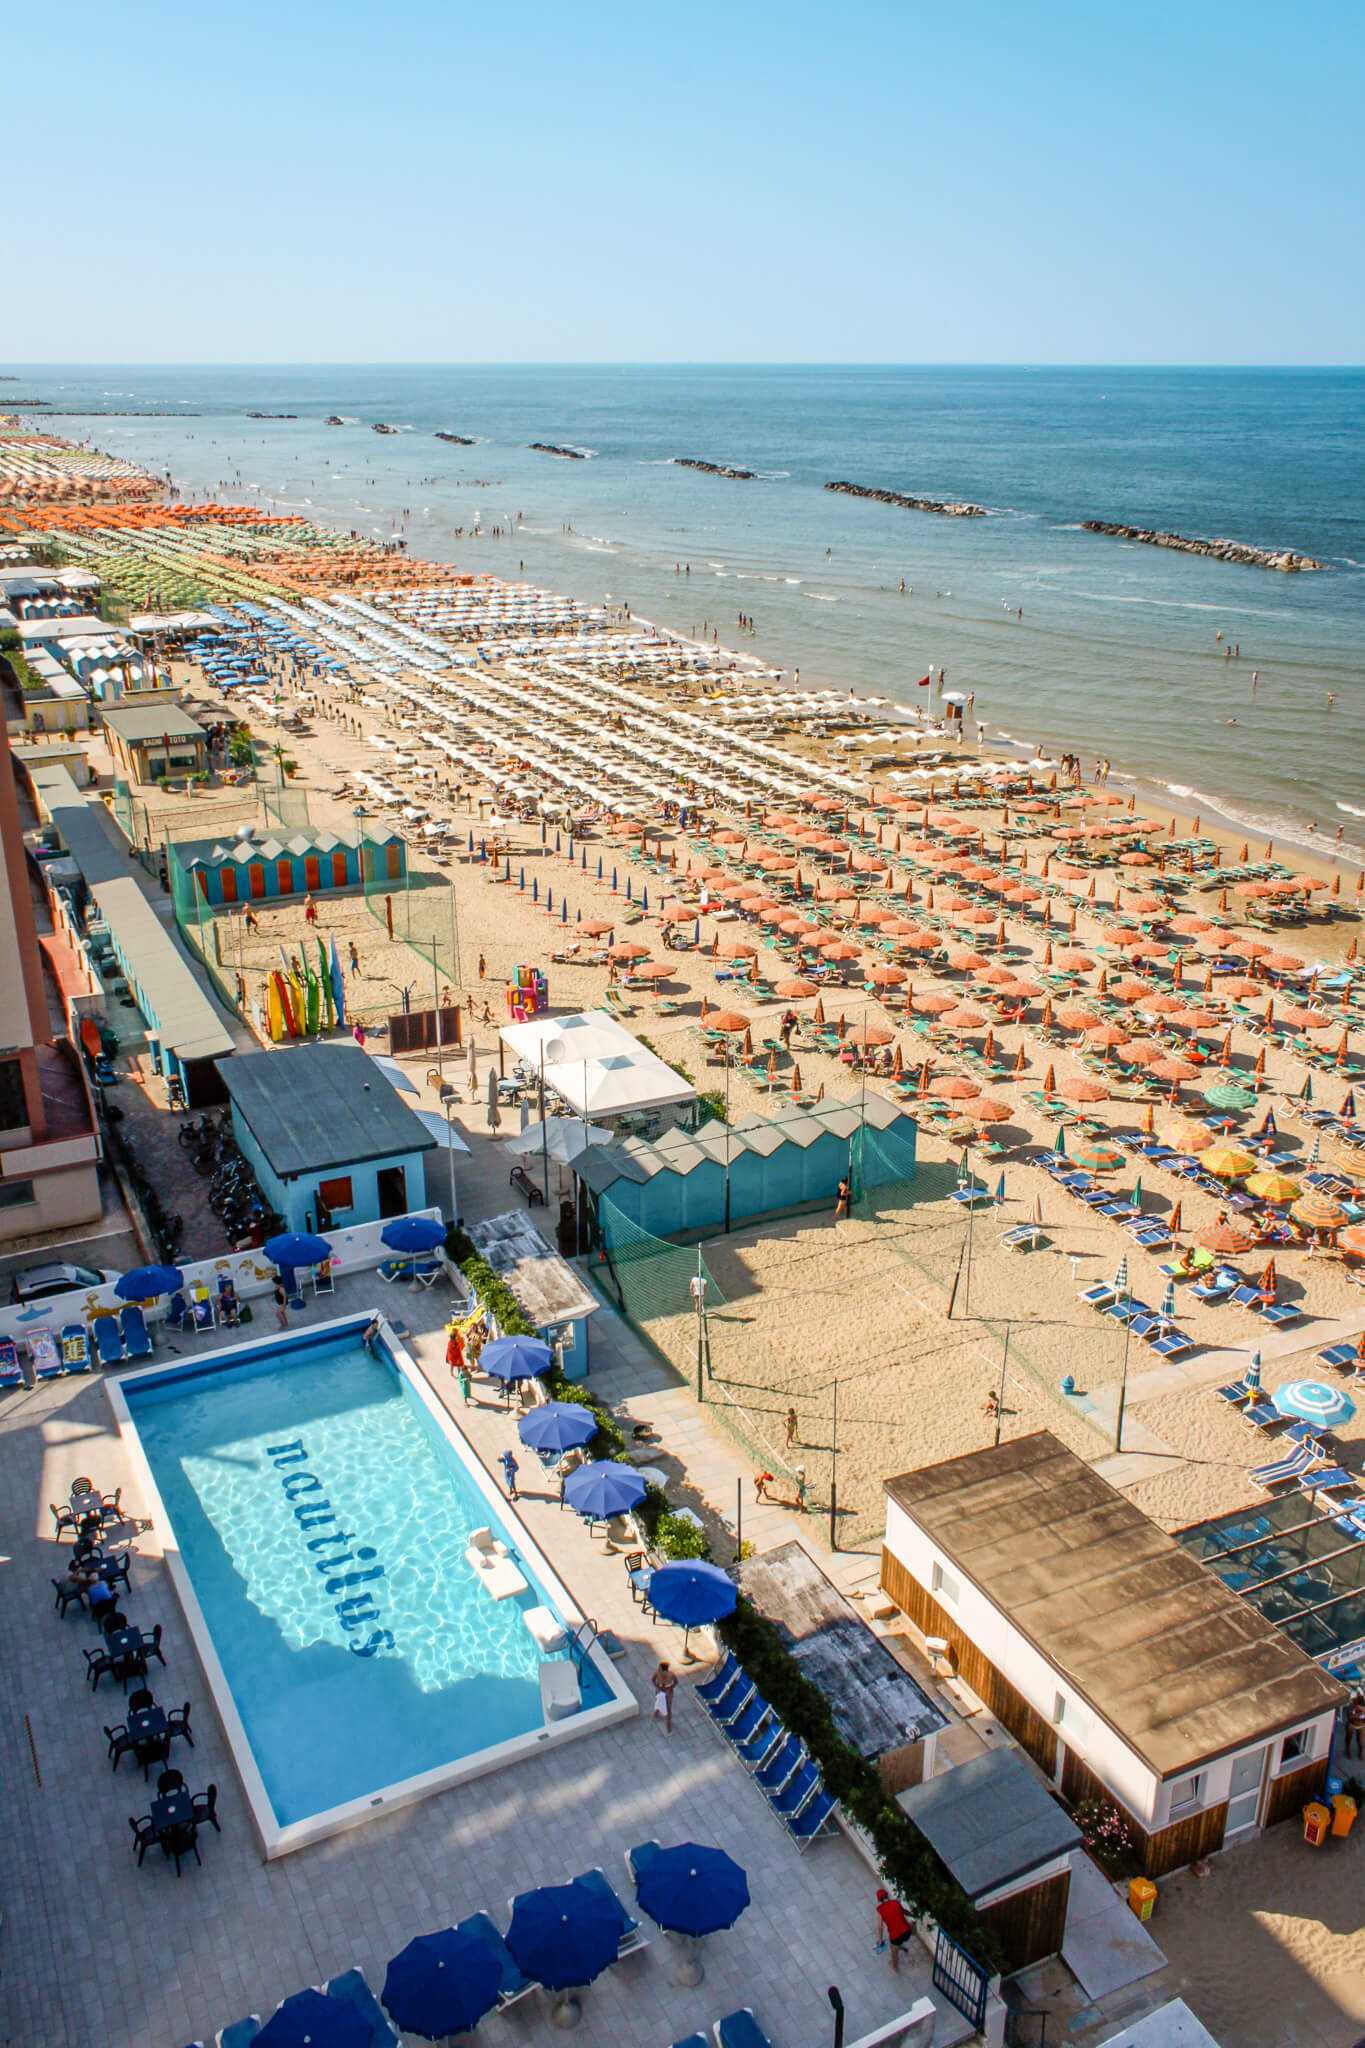 The manicured beach in the resort town of Pesaro, Italy